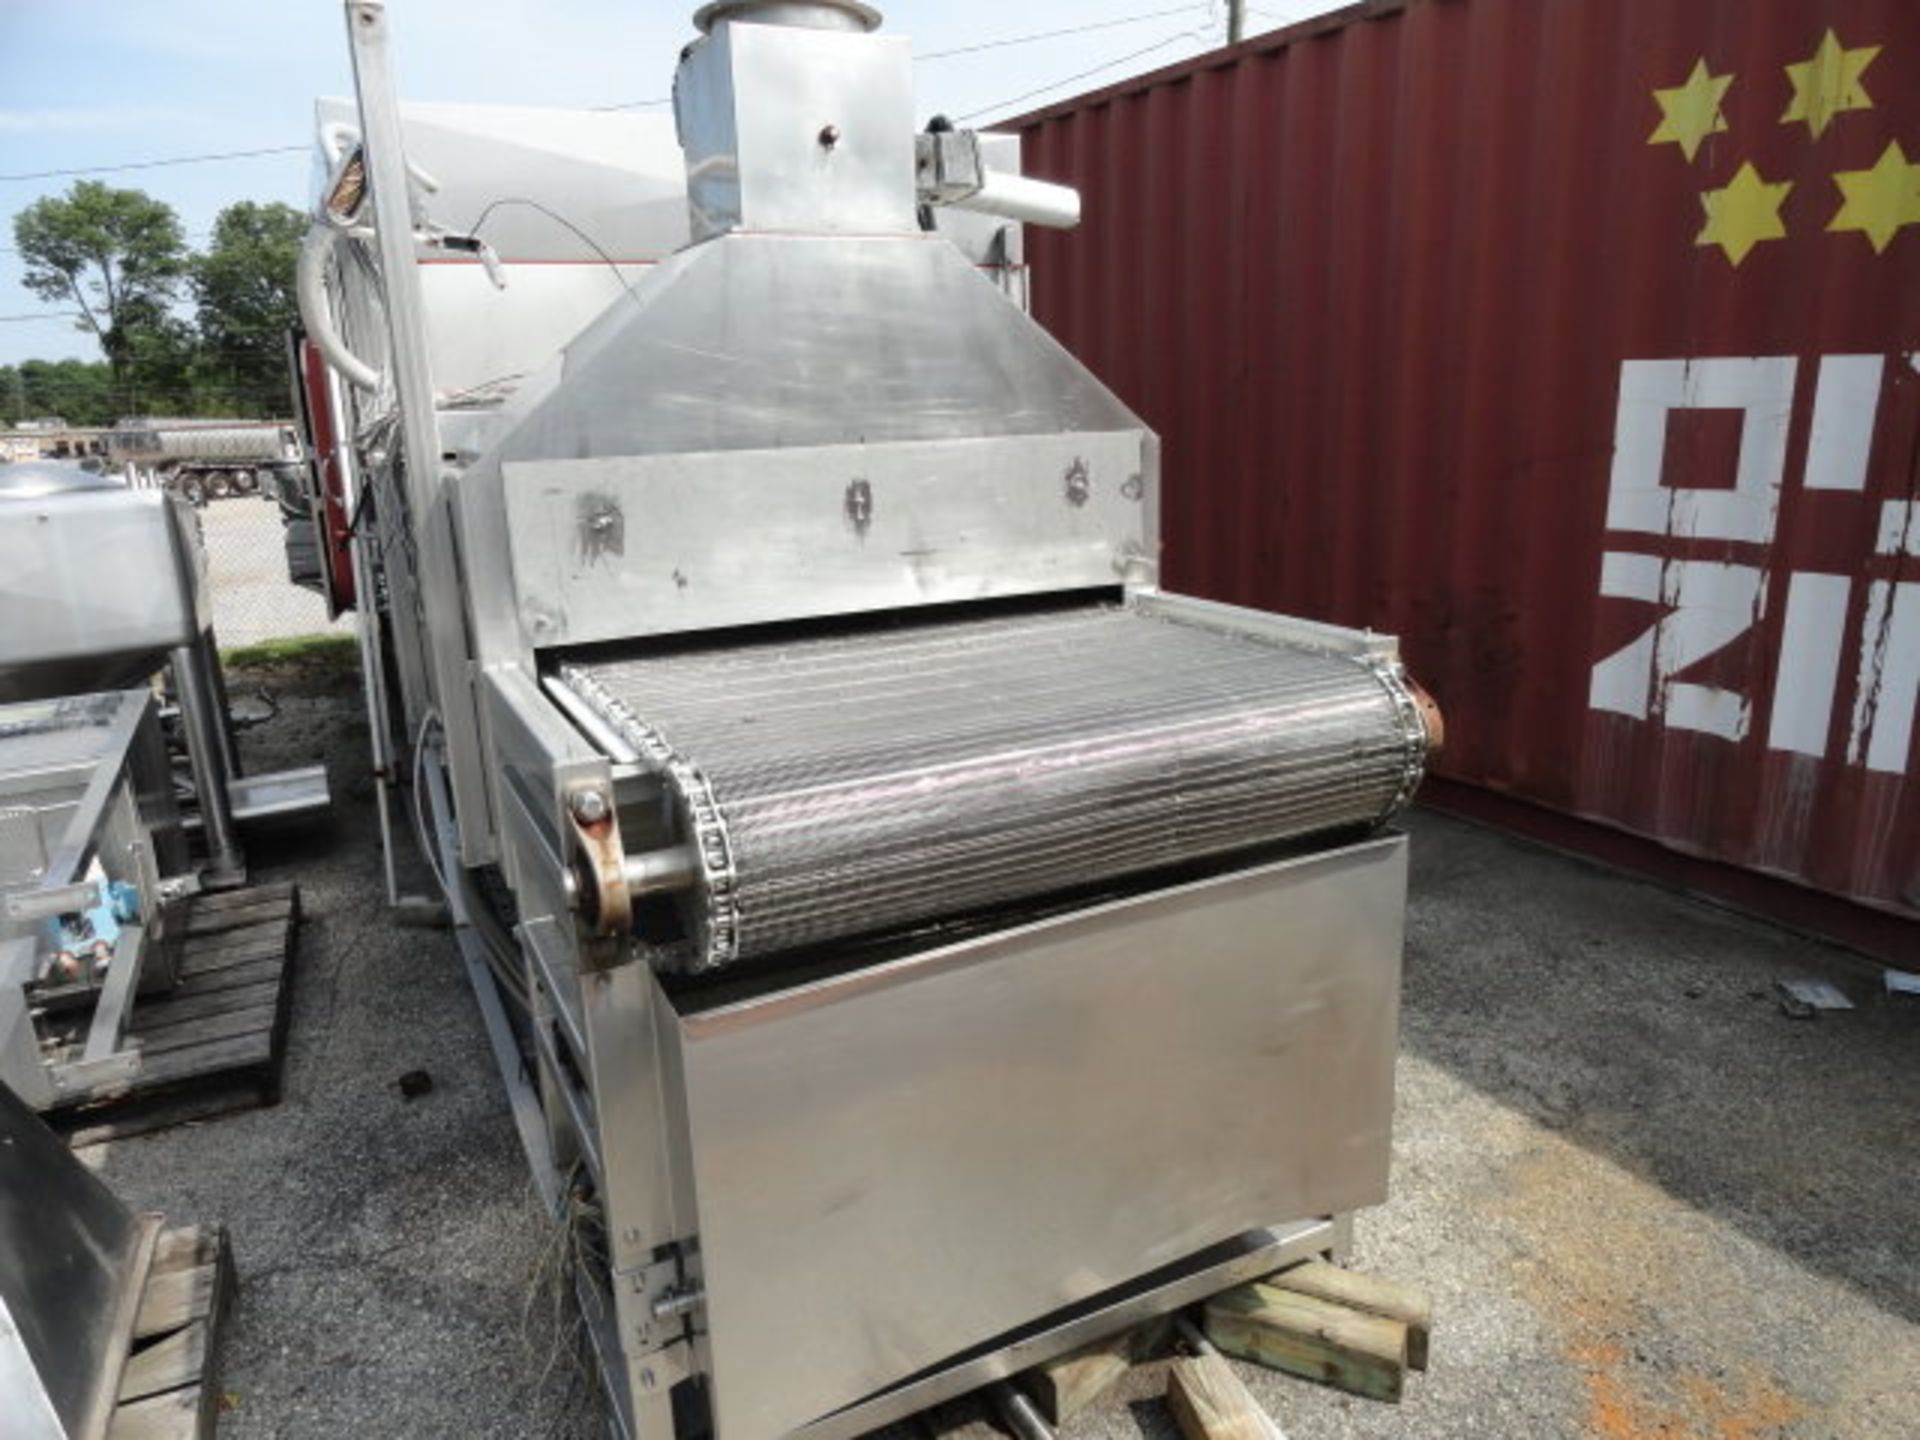 Enviro-Pak Impingement Oven, continuous convection oven, 40" wide x 24' long product belt, cook zone - Image 3 of 9